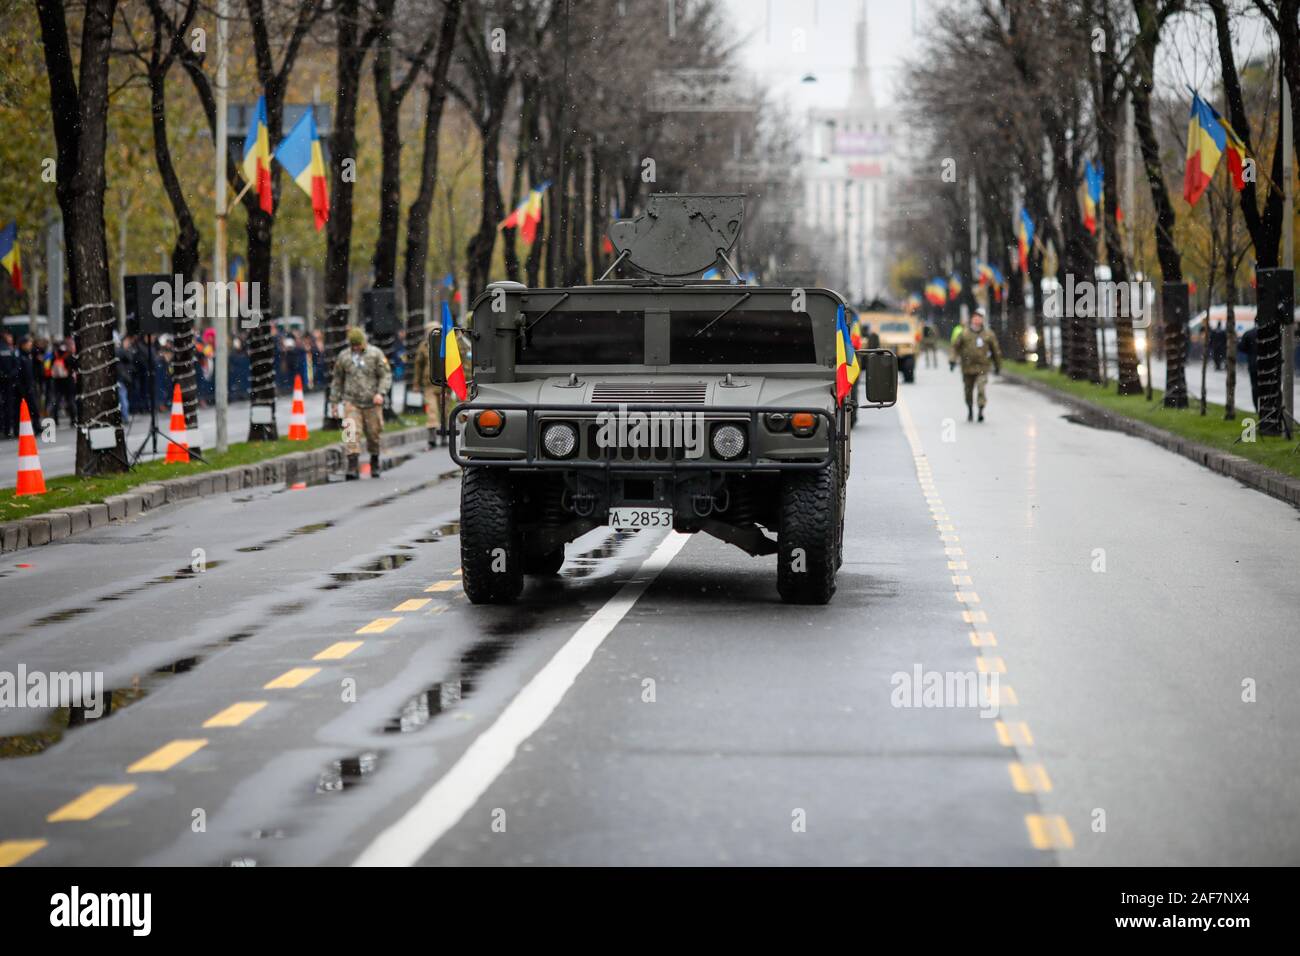 Bucharest, Romania - December 01, 2019: Romanian Army High Mobility Multipurpose Wheeled Vehicle (HMMWV, colloquial Humvee) at the Romanian National D Stock Photo